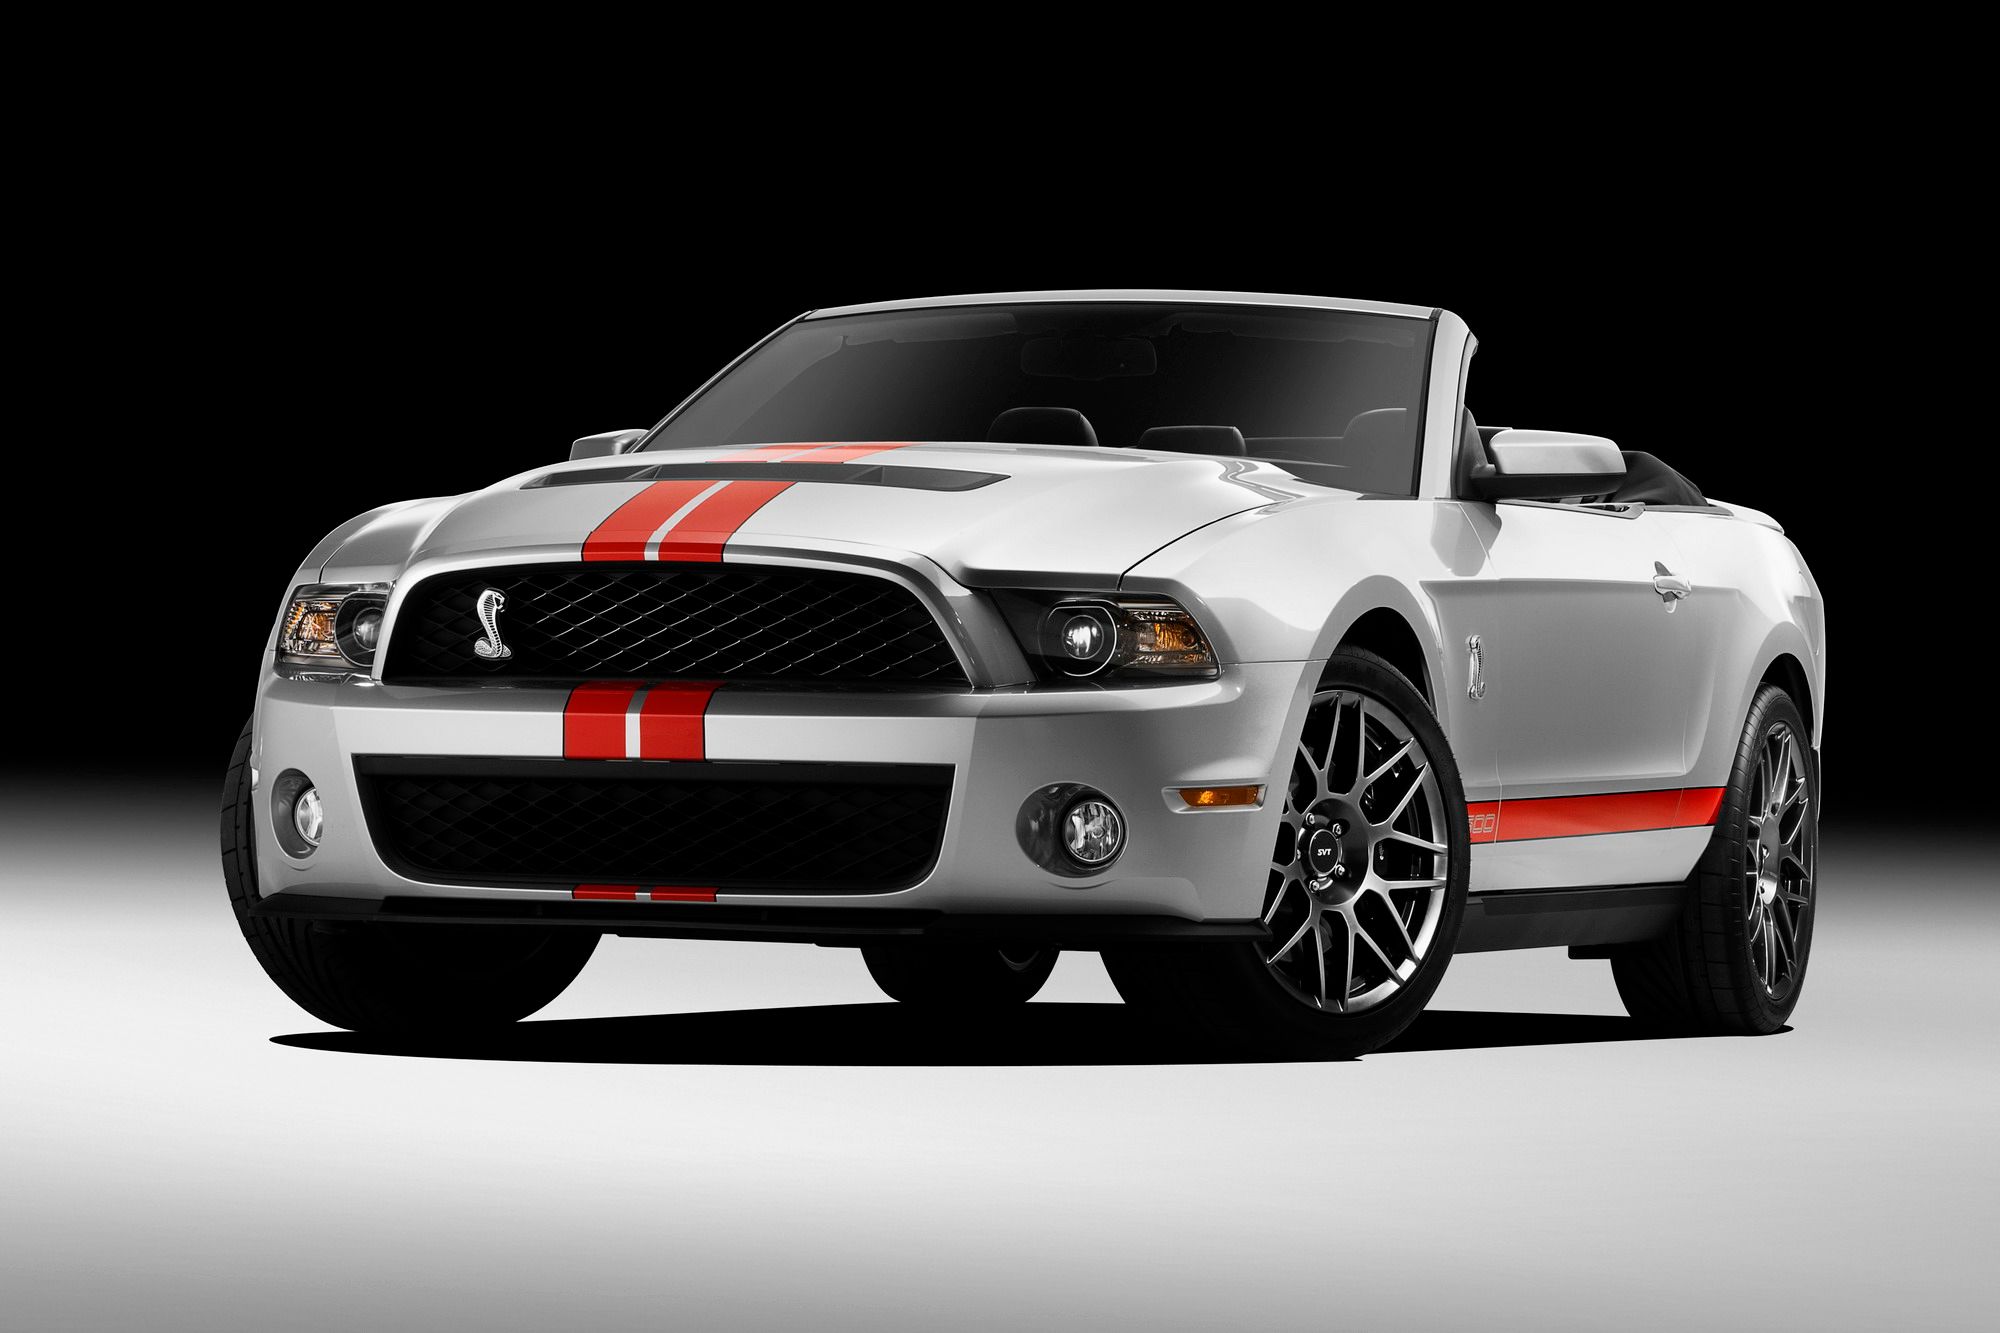  2011 Ford Shelby GT500 